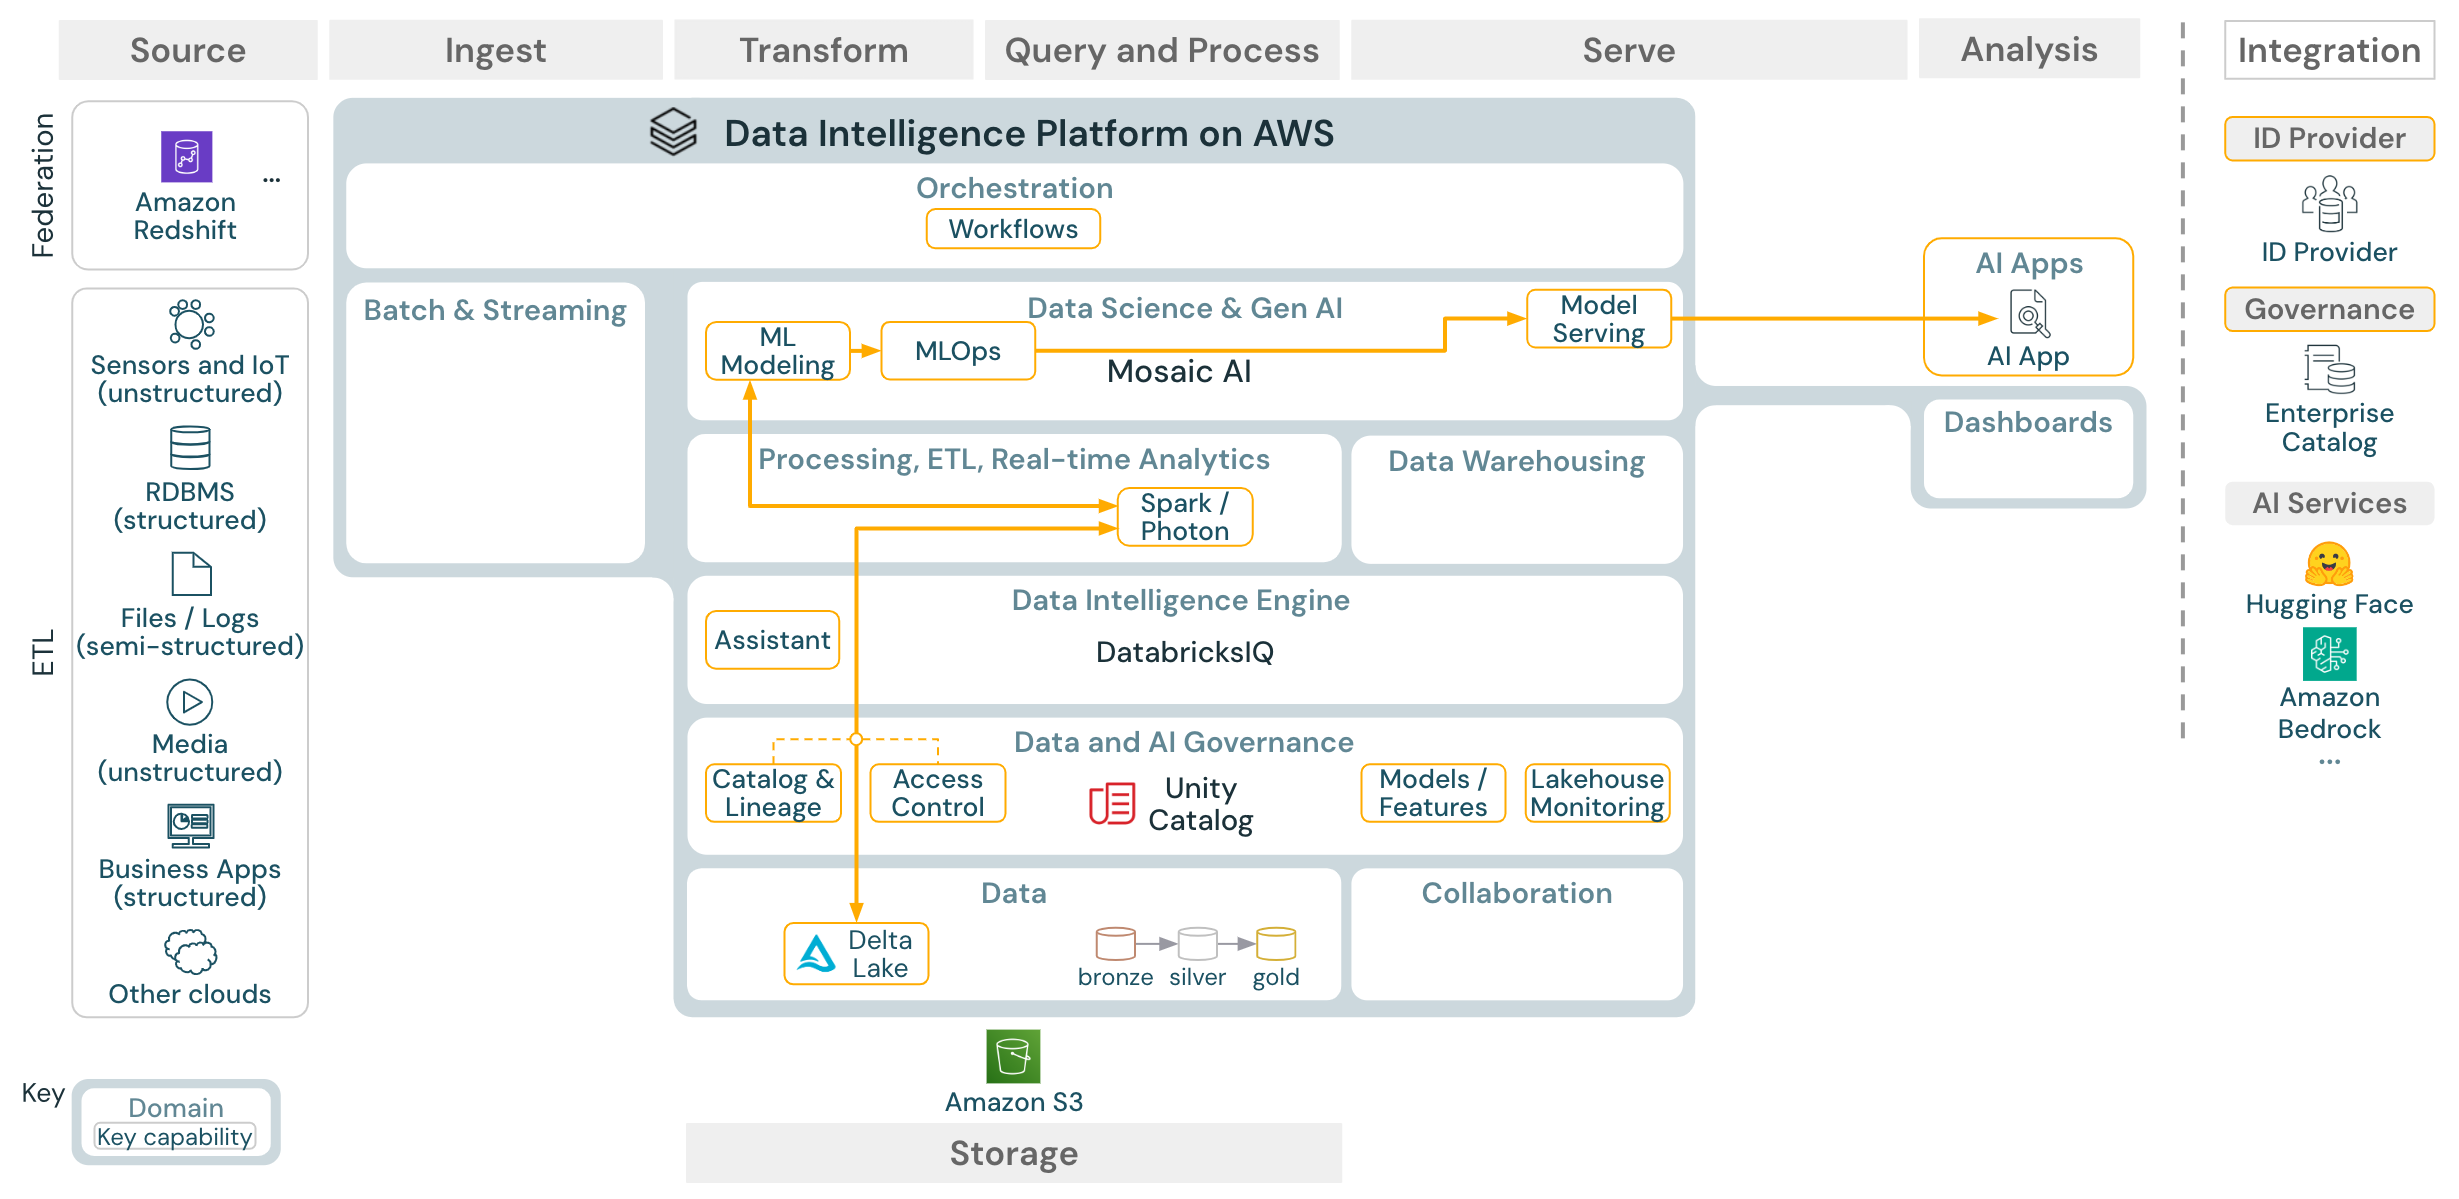 Machine learning and AI reference architecture for Databricks on AWS